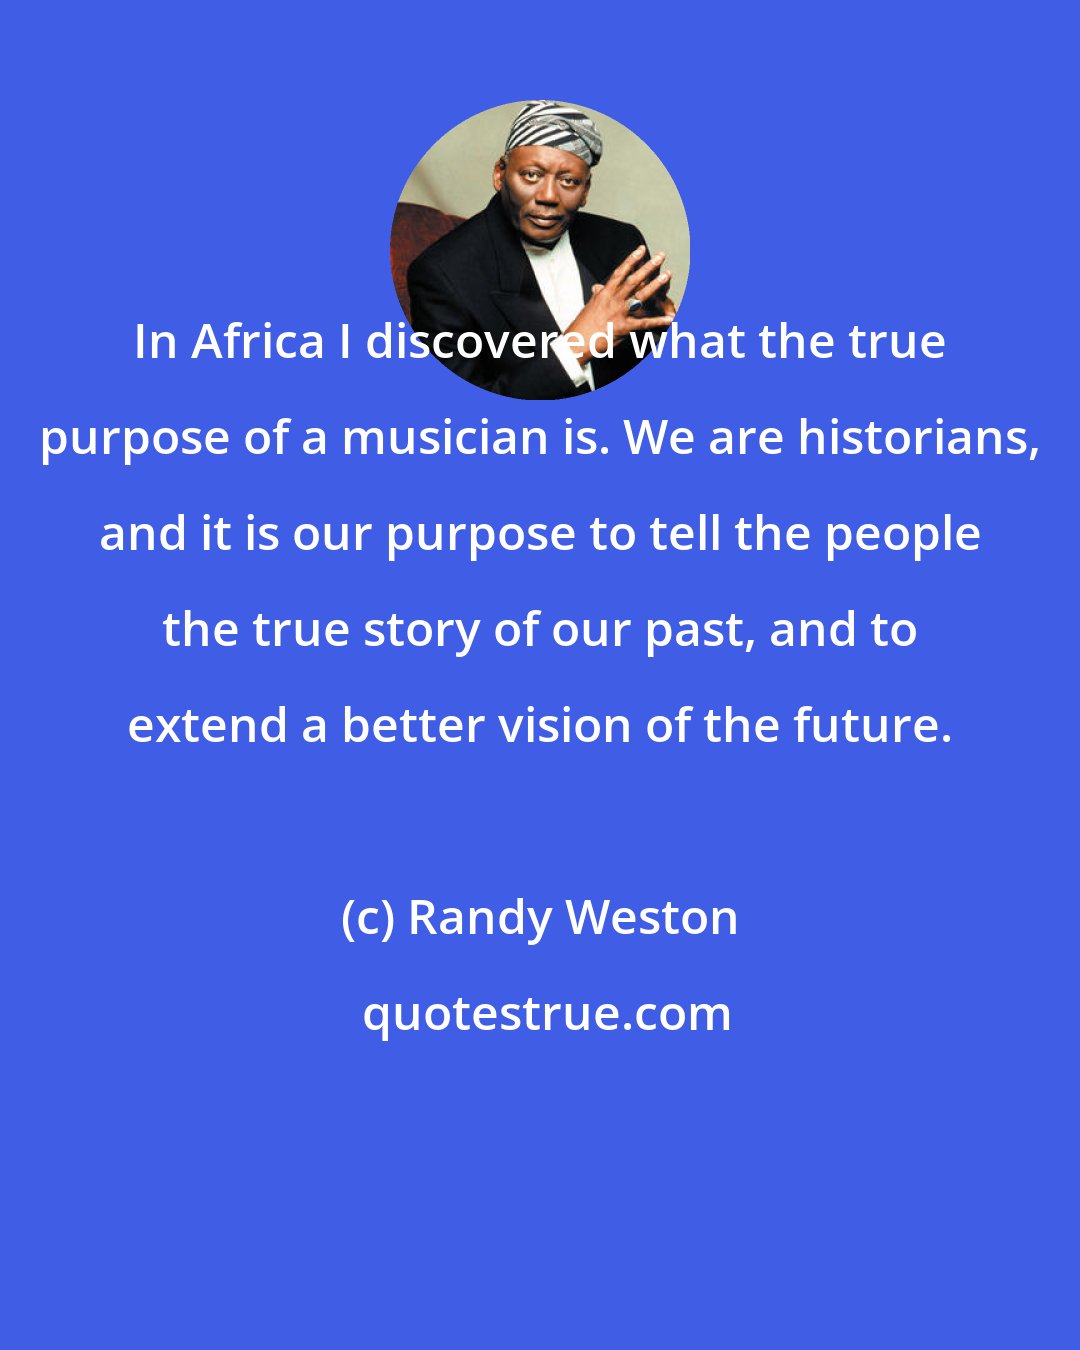 Randy Weston: In Africa I discovered what the true purpose of a musician is. We are historians, and it is our purpose to tell the people the true story of our past, and to extend a better vision of the future.